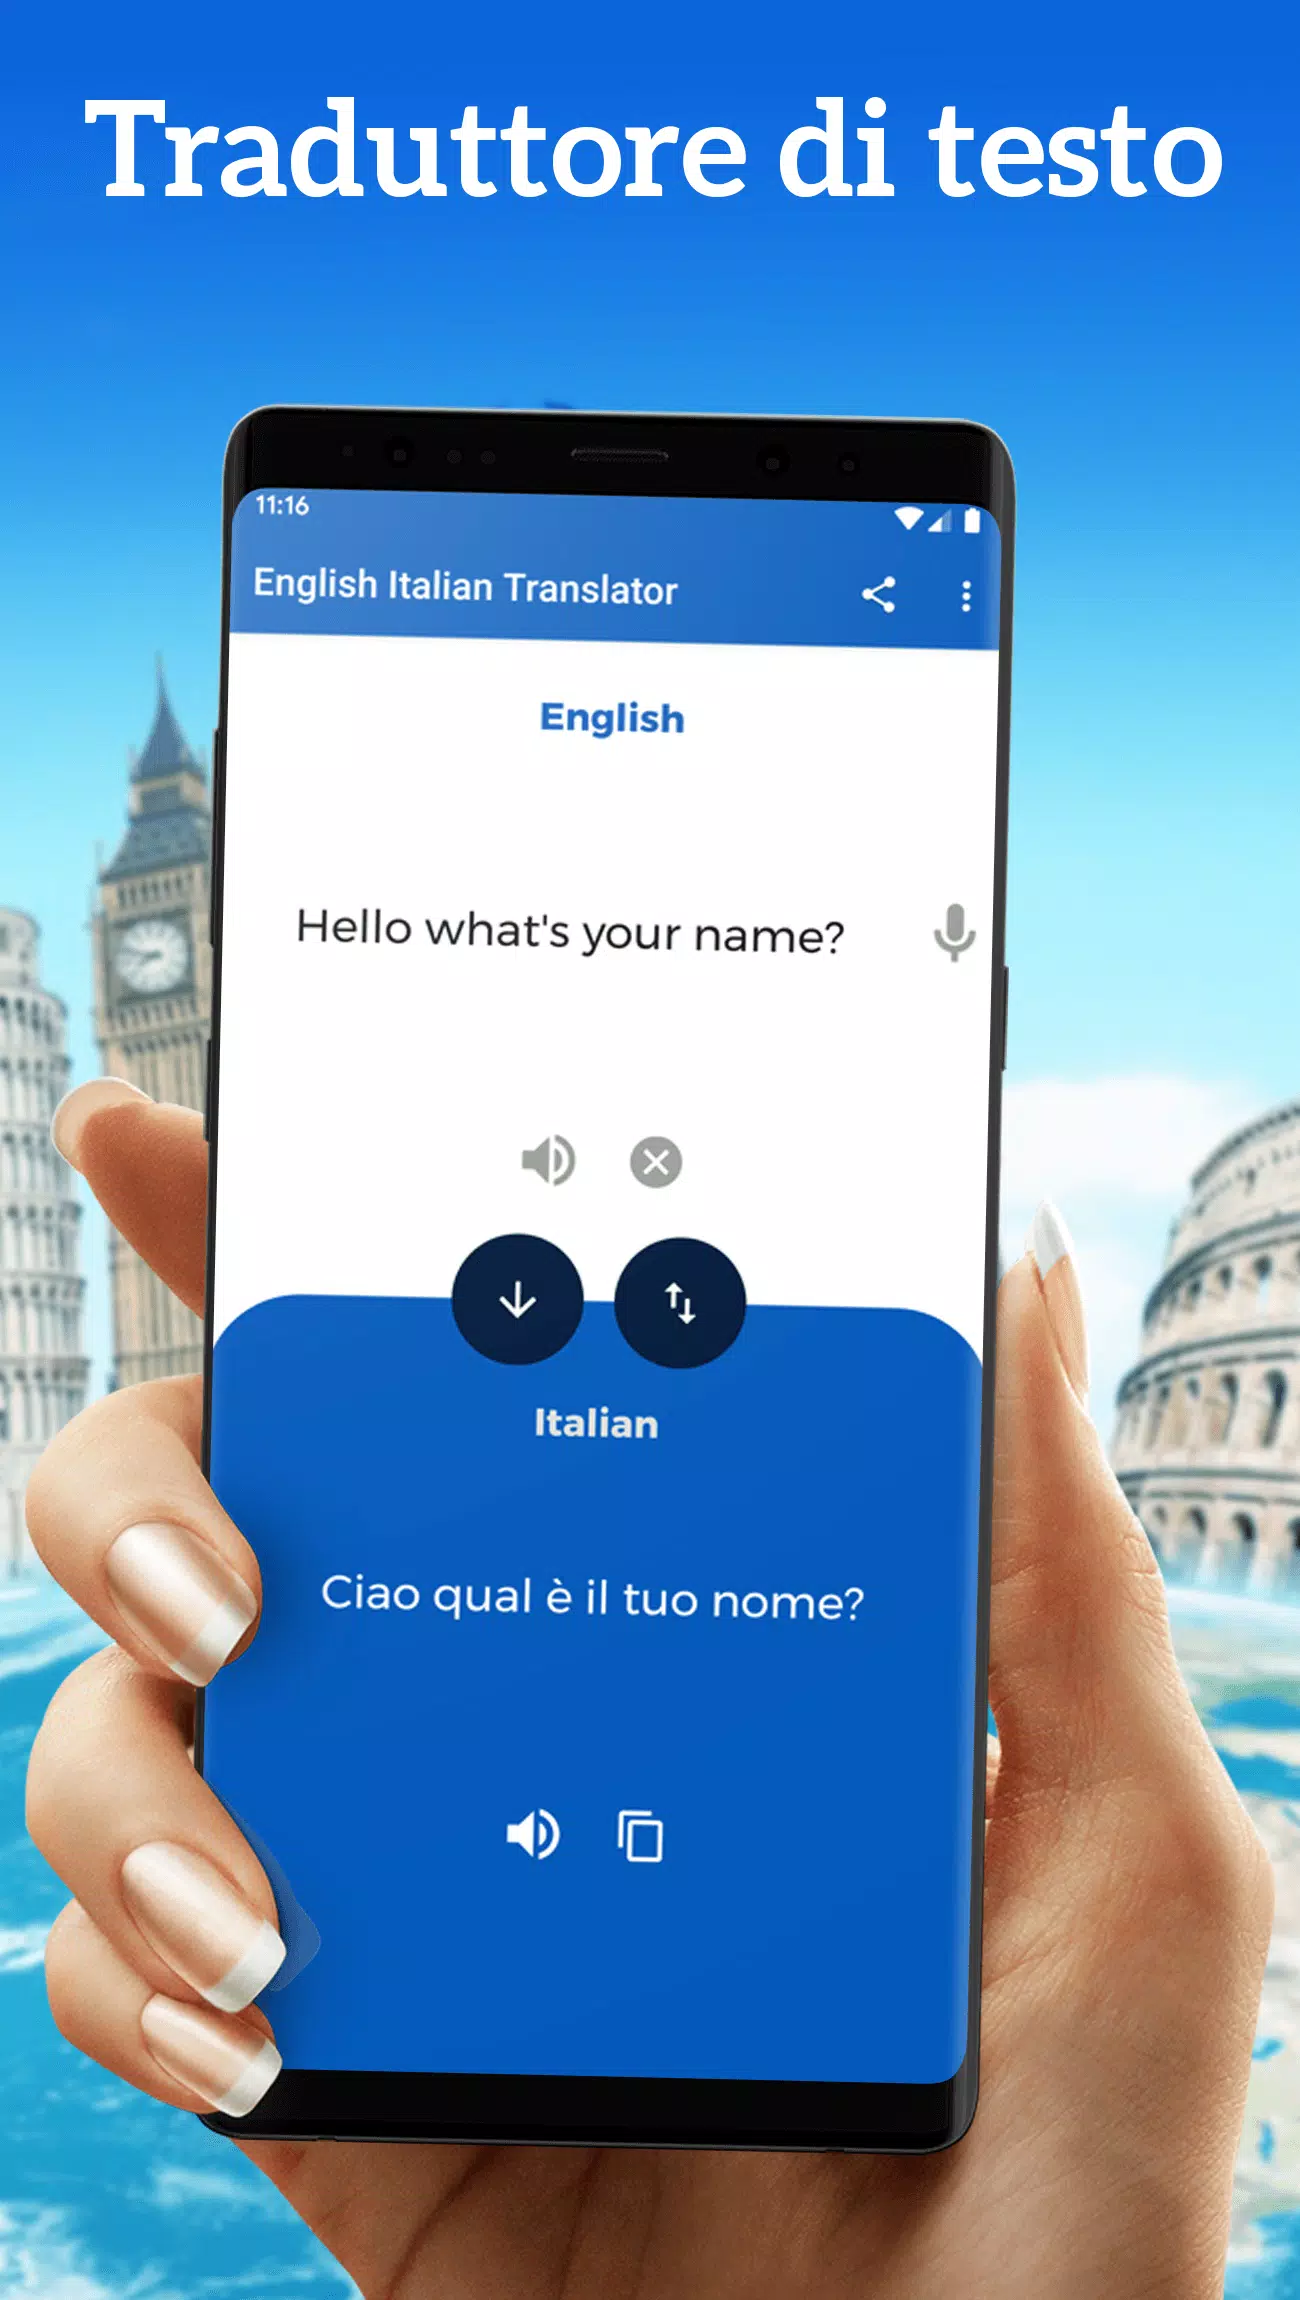 Traduttore inglese italiano for Android - APK Download